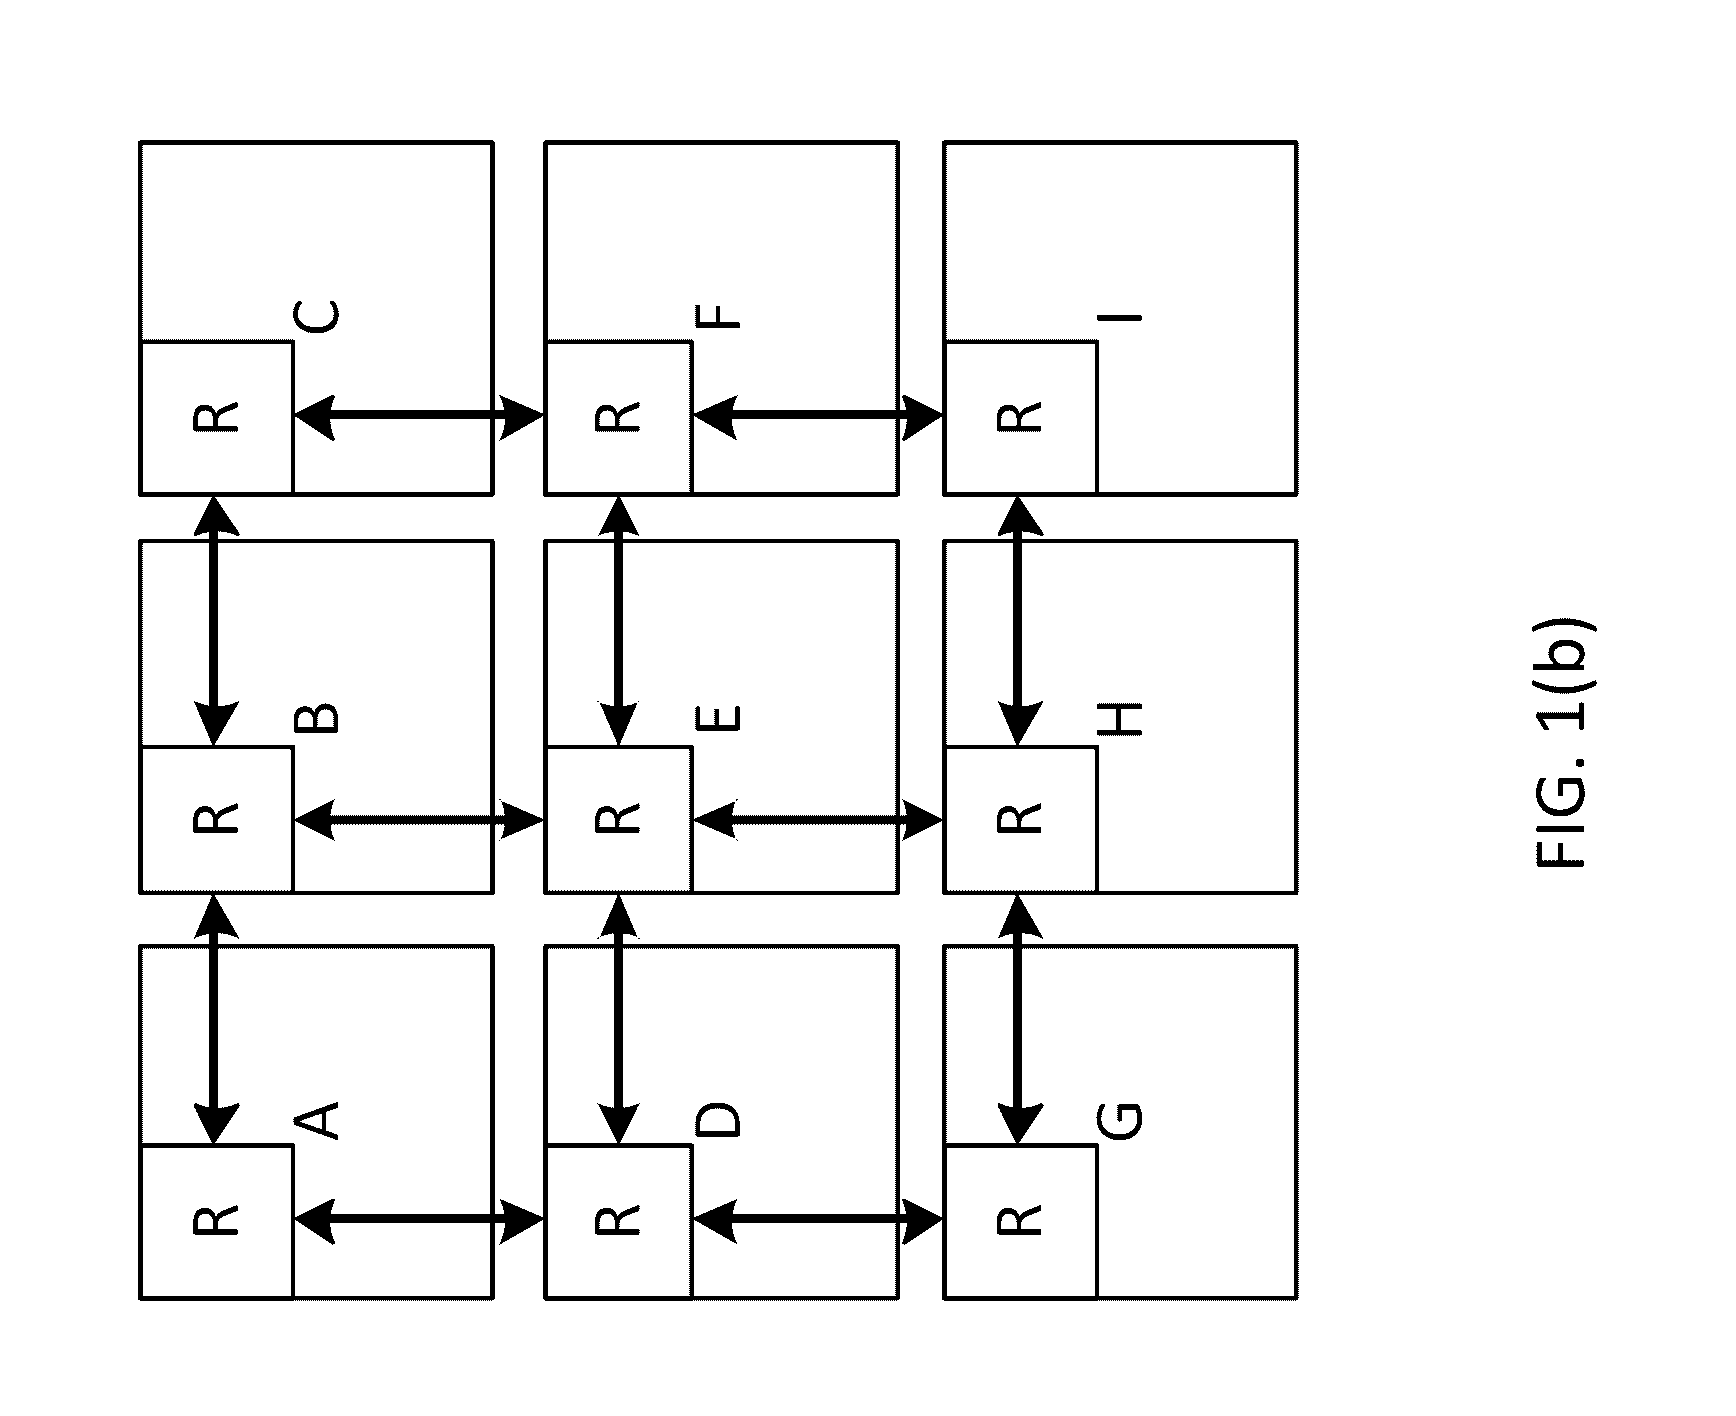 Hardware and software enabled implementation of power profile management instructions in system on chip